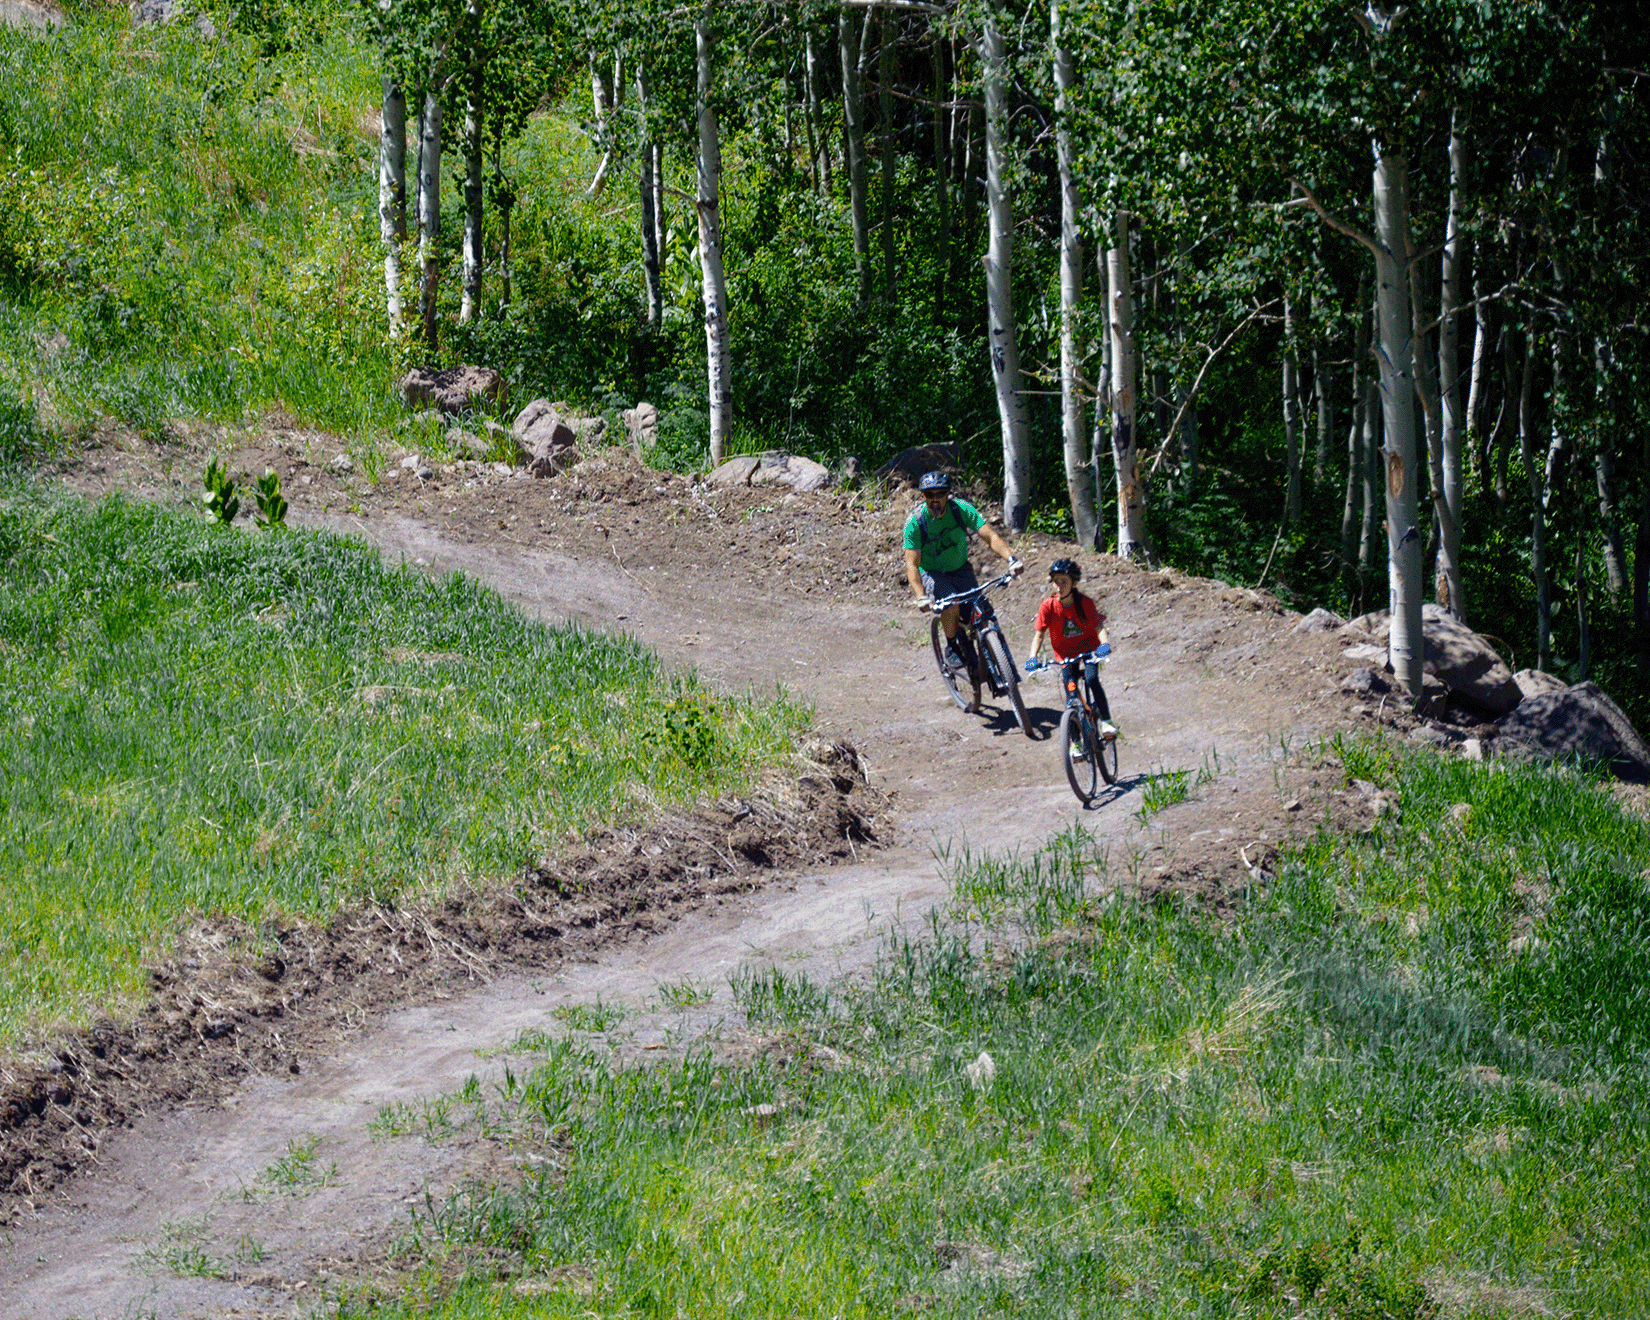 young bike rider with adult following